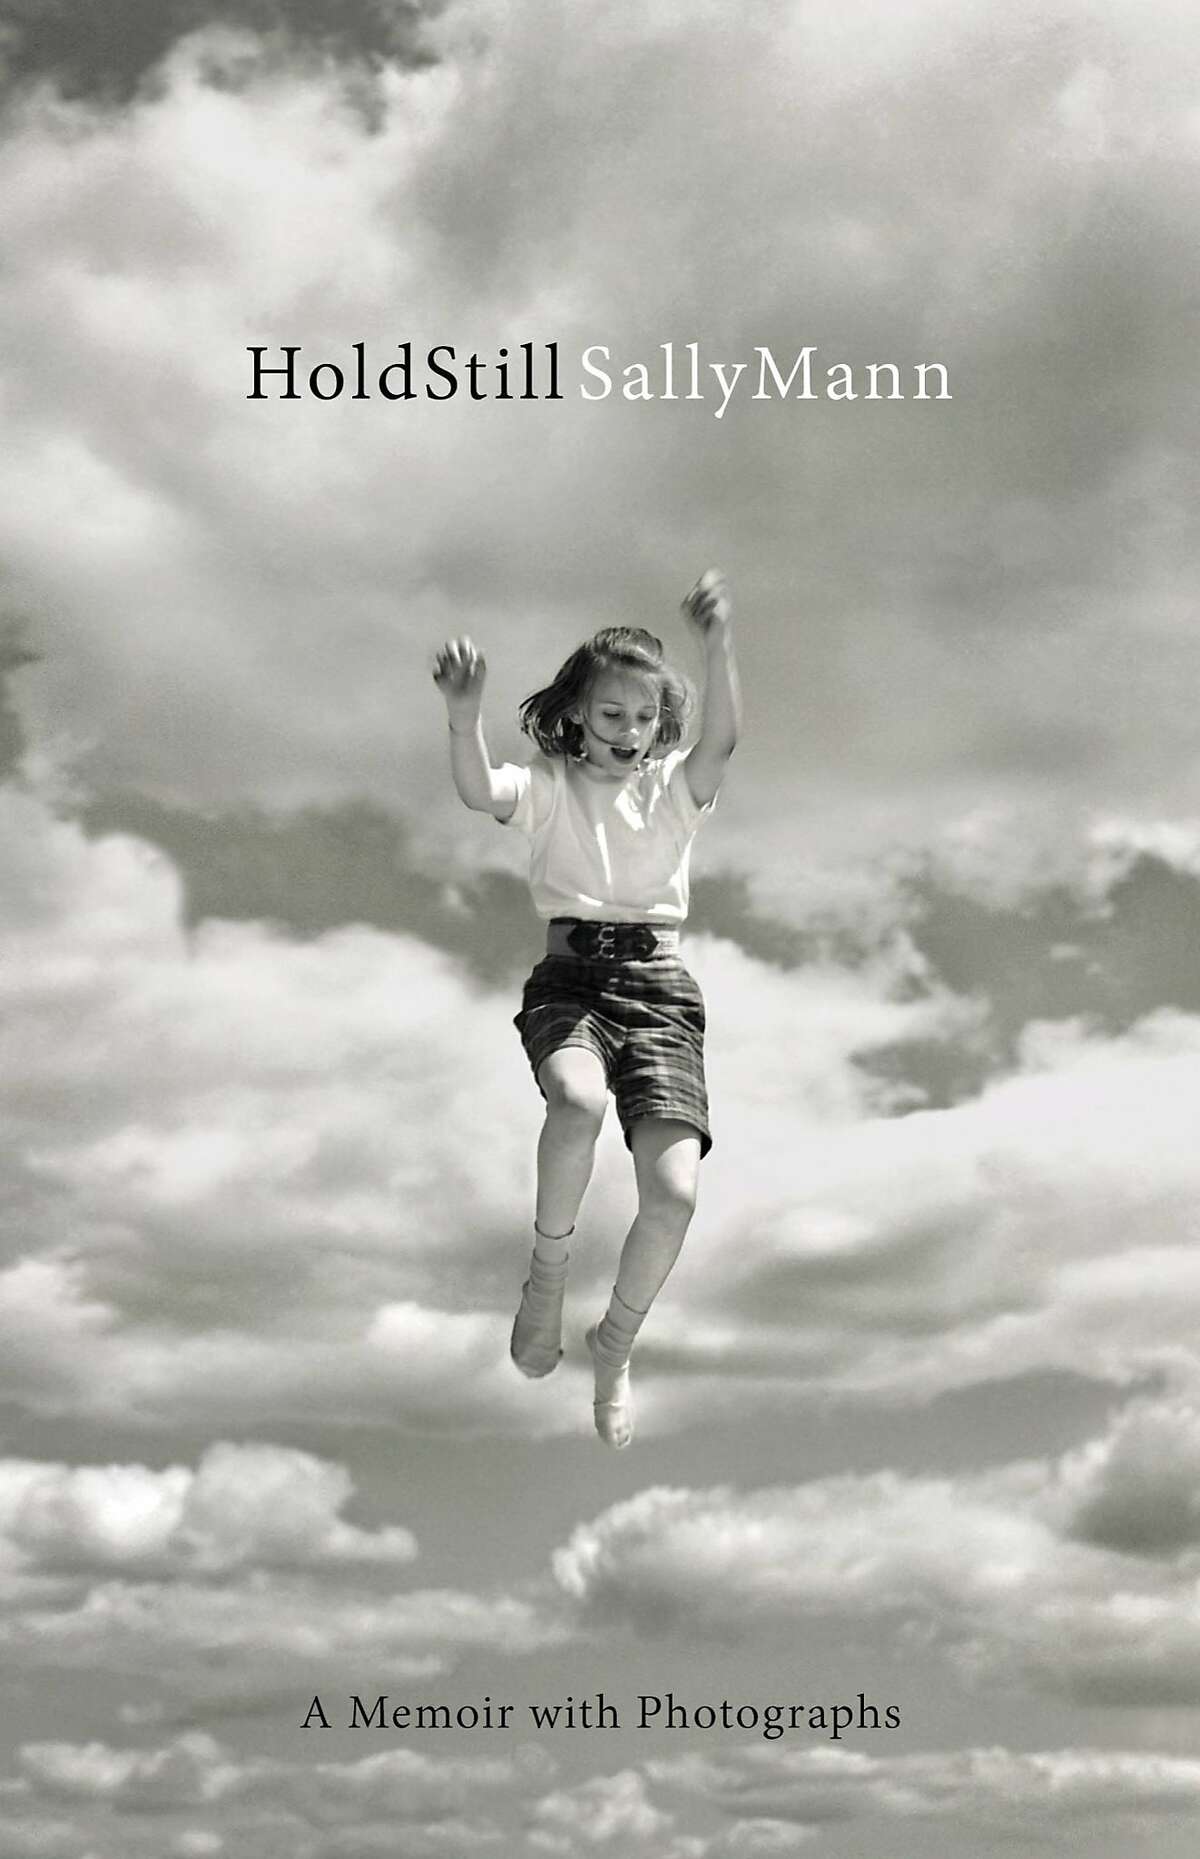 This book cover image released by Little, Brown and Co. shows "Hold Still," by Sally Mann. (Little, Brown and Co. via AP) AP PROVIDES ACCESS TO THIS HANDOUT PHOTO TO BE USED SOLELY TO ILLUSTRATE NEWS REPORTING OR COMMENTARY ON THE FACTS OR EVENTS DEPICTED IN THIS IMAGE. THIS IMAGE MAY ONLY BE USED FOR 14 DAYS FROM TIME OF TRANSMISSION; NO ARCHIVING; NO LICENSING.